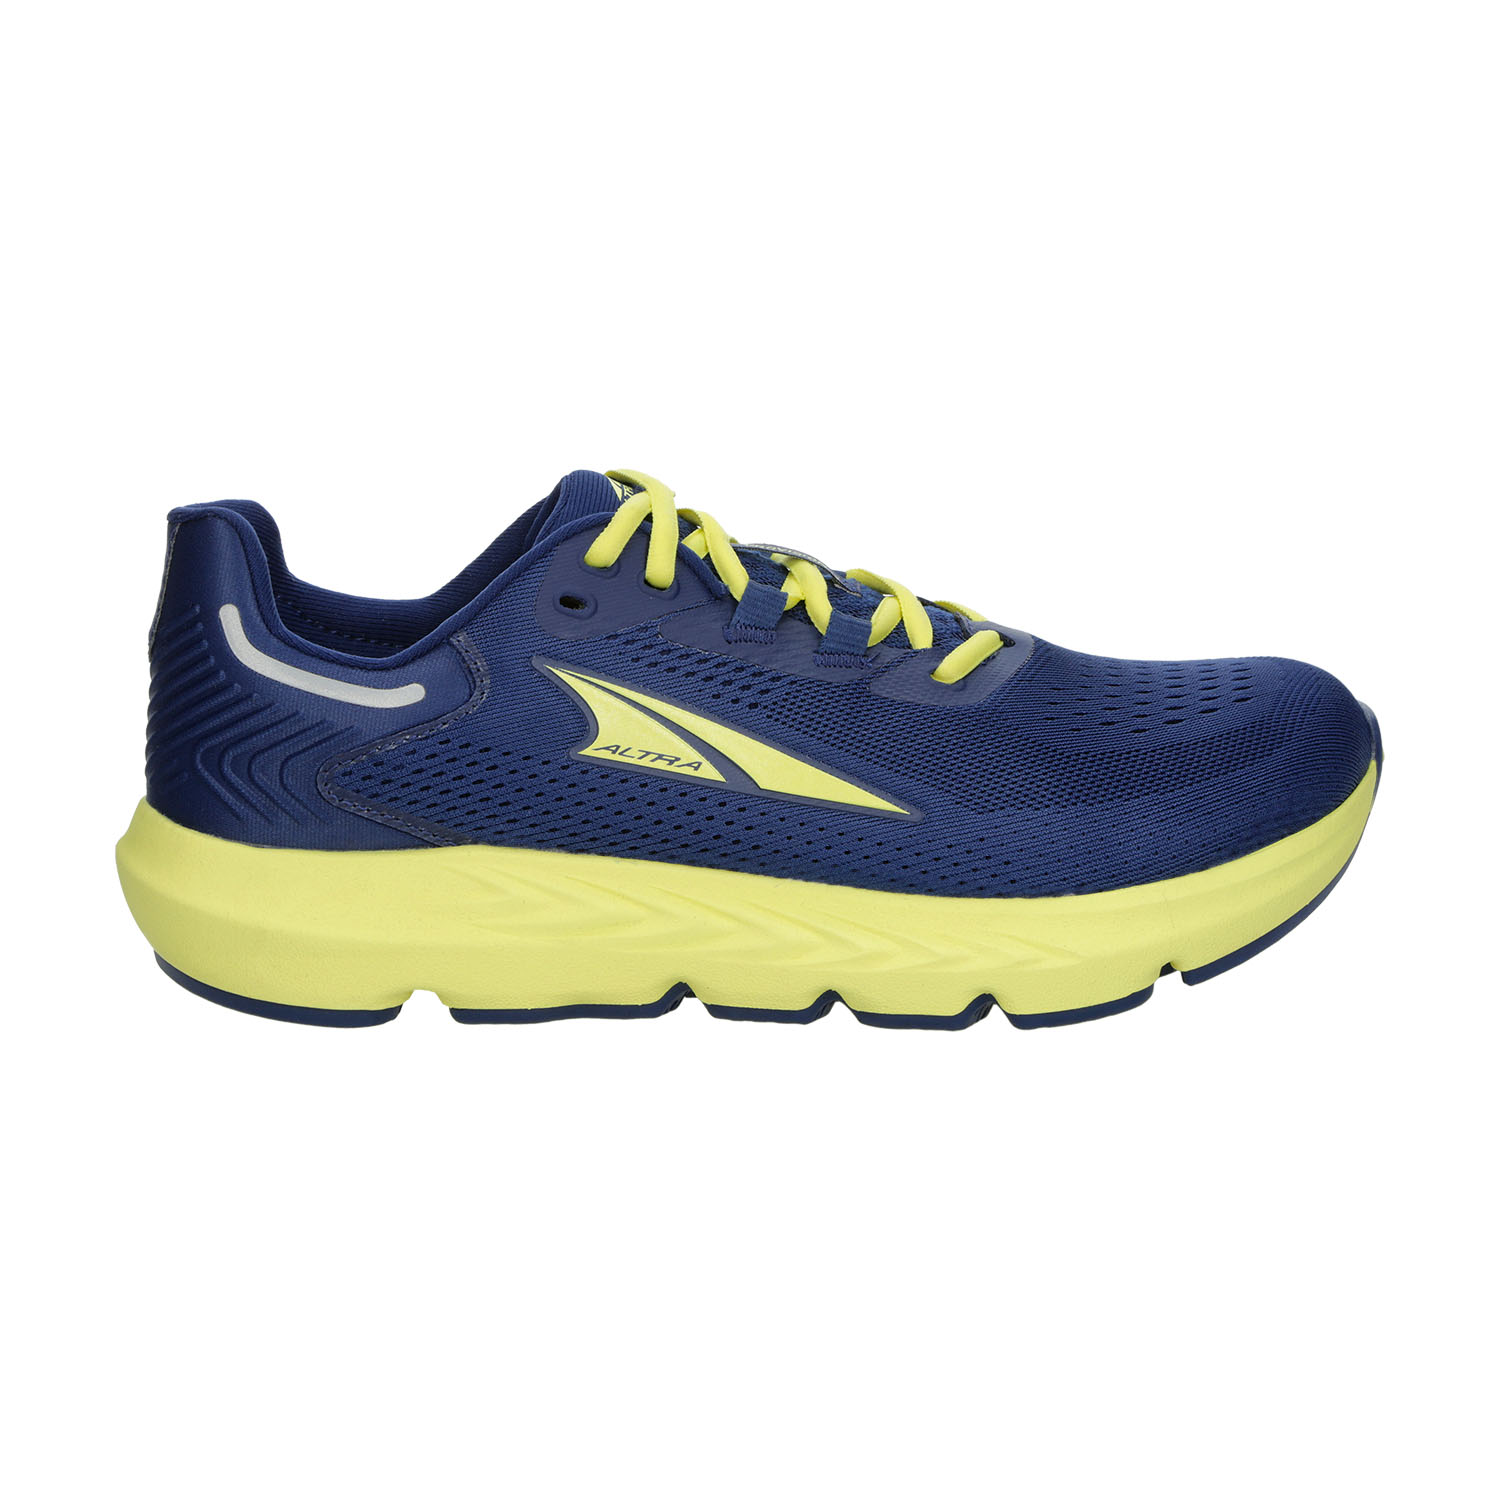 Altra Provision 7 Men's Running Shoes - Blue